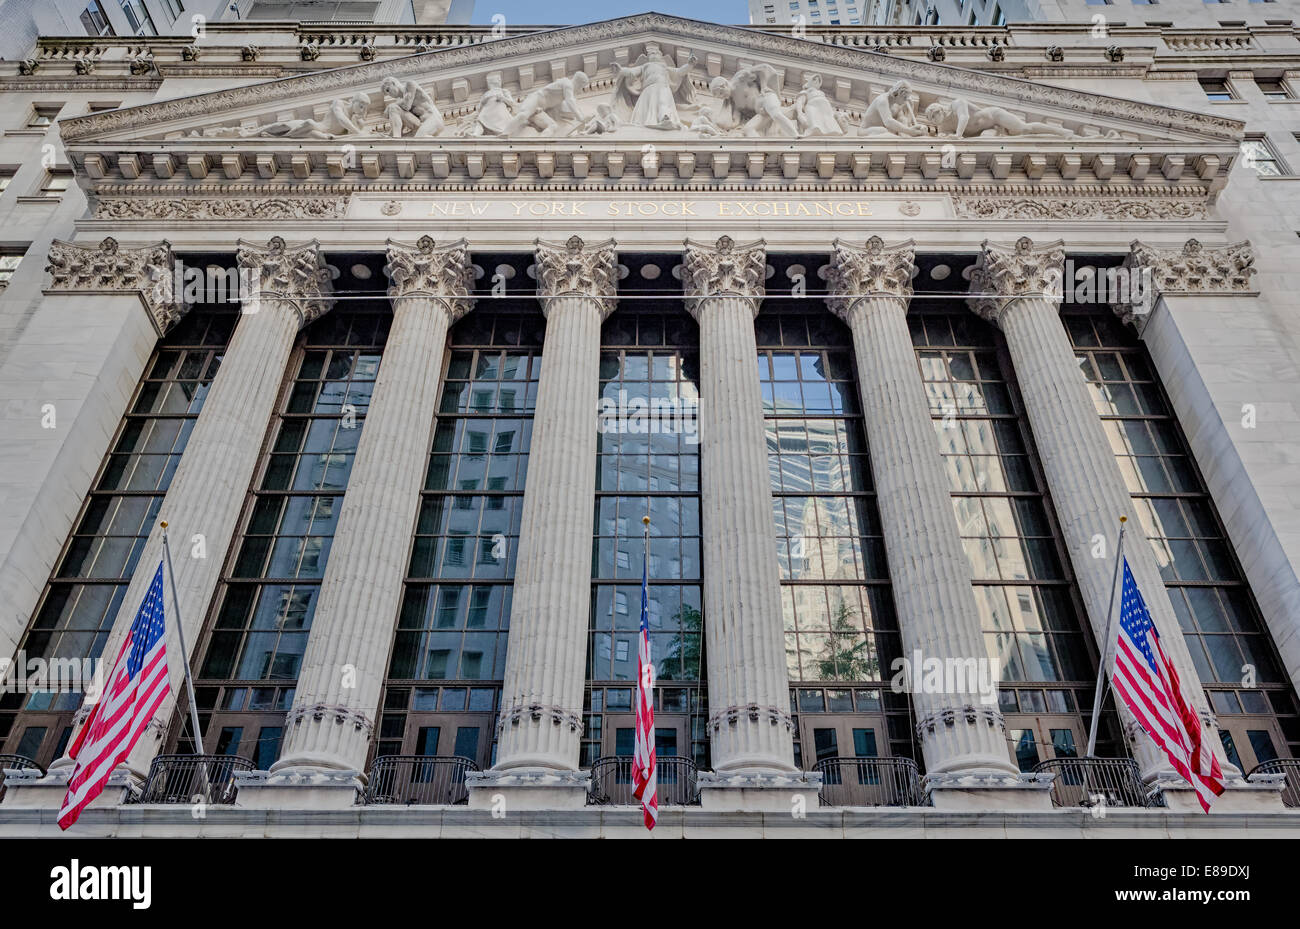 New York Stock Exchange NYSE located in 11 Wall Street in the Financial District of lower Manhattan in New York City, New York. Stock Photo